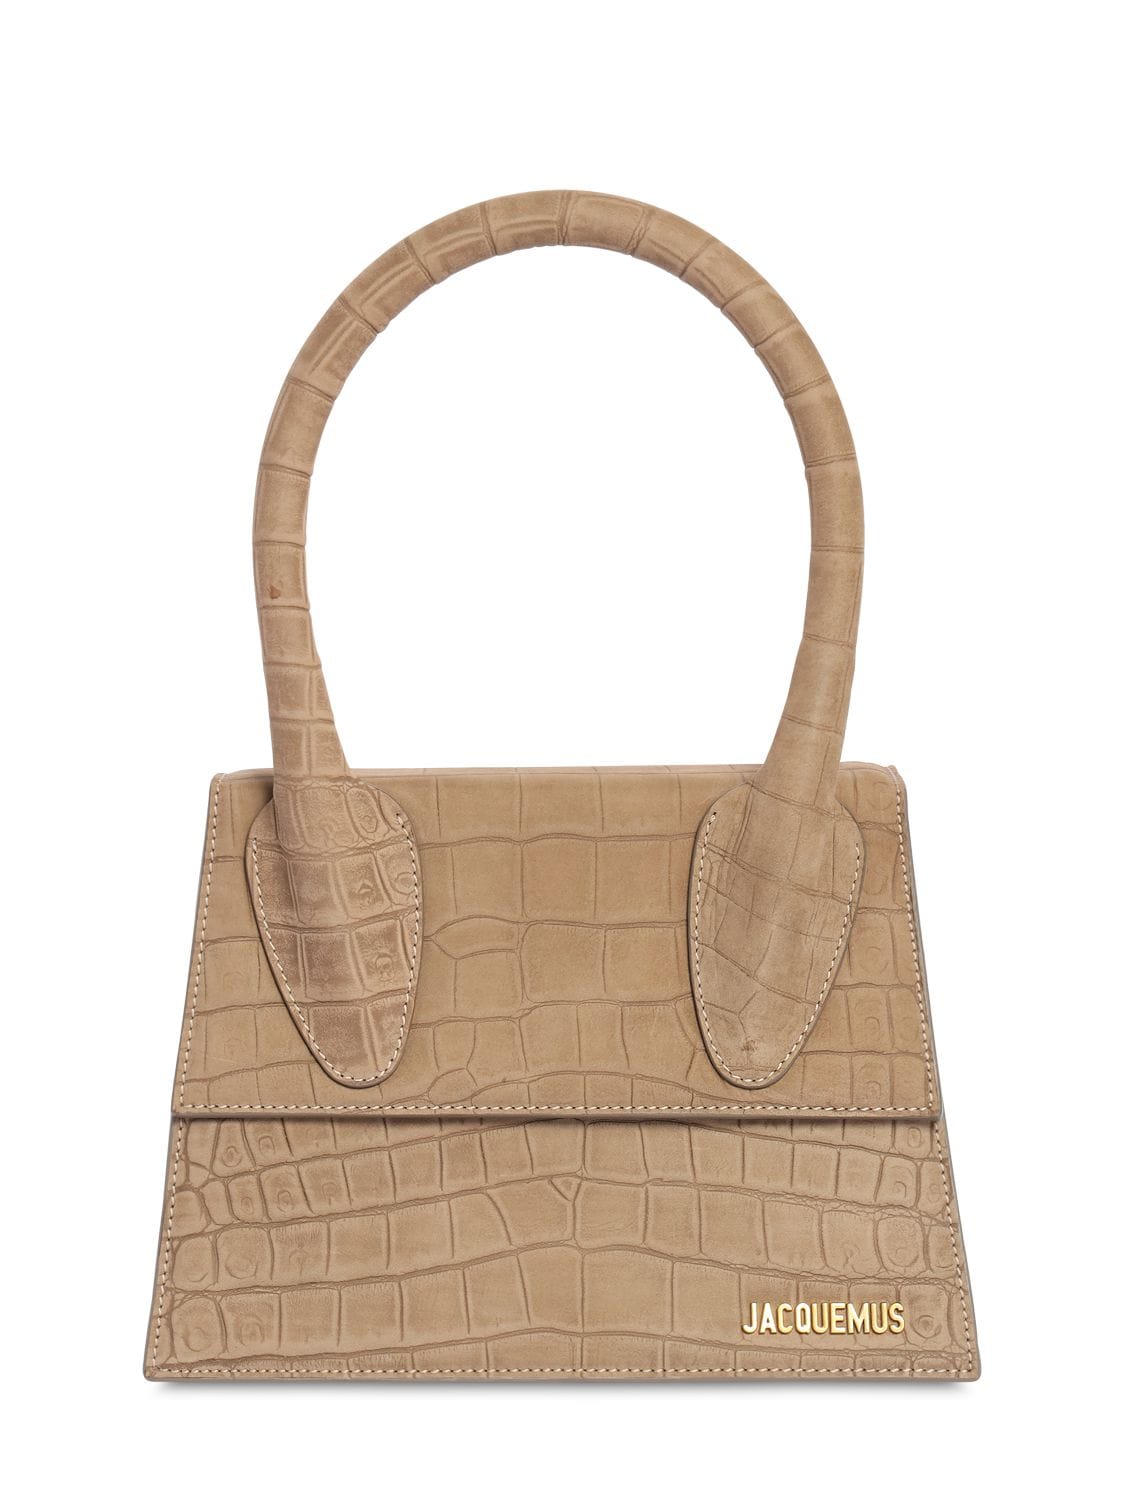 Jacquemus Le Grand Chiquito Embossed Leather Bag In Beige